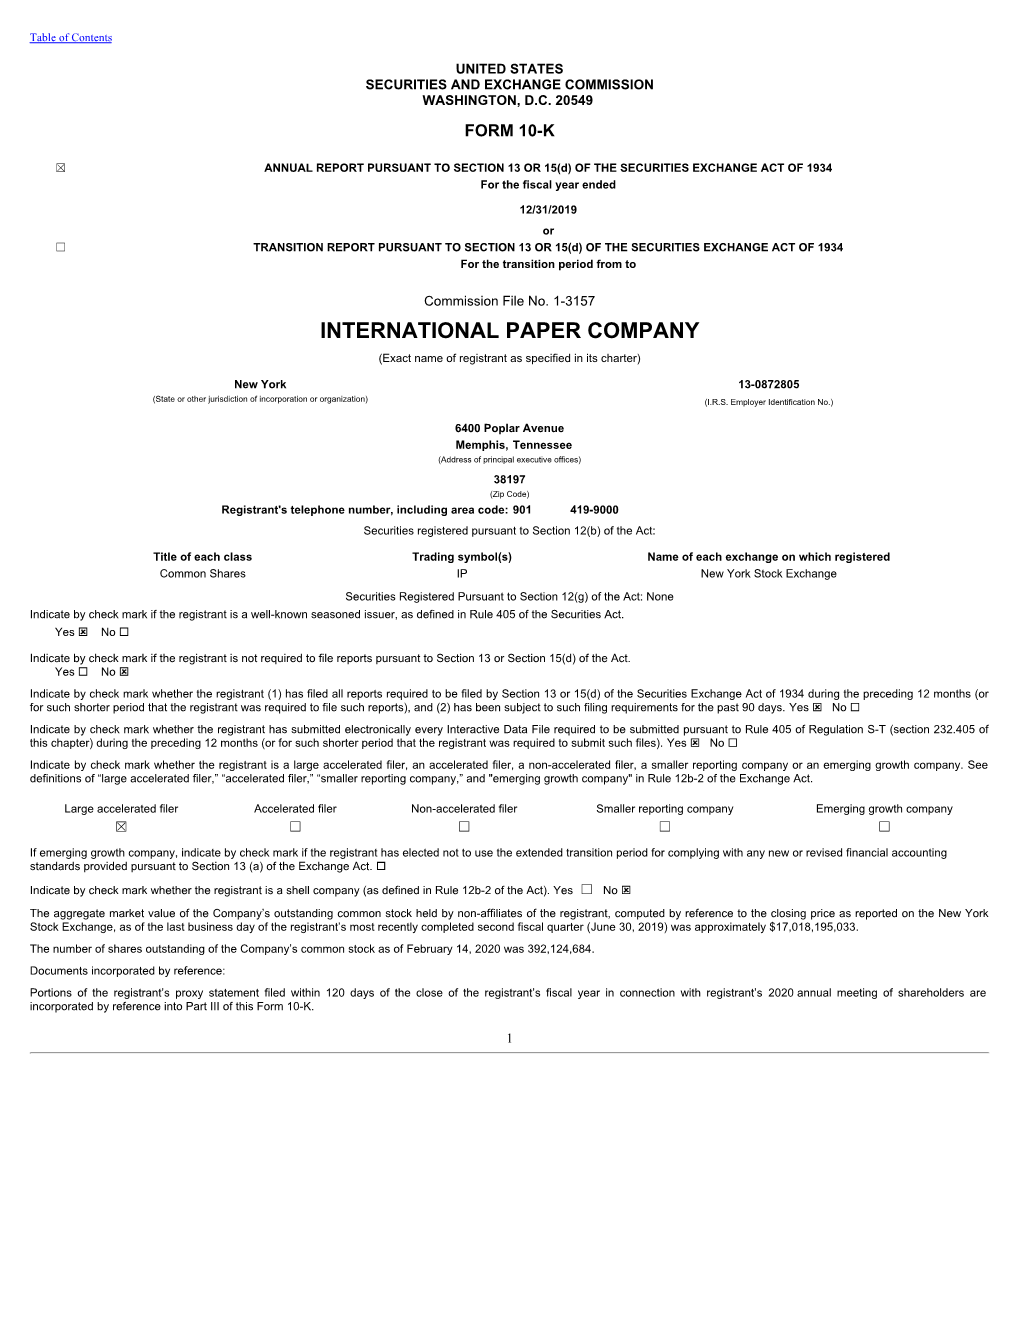 INTERNATIONAL PAPER COMPANY (Exact Name of Registrant As Specified in Its Charter)